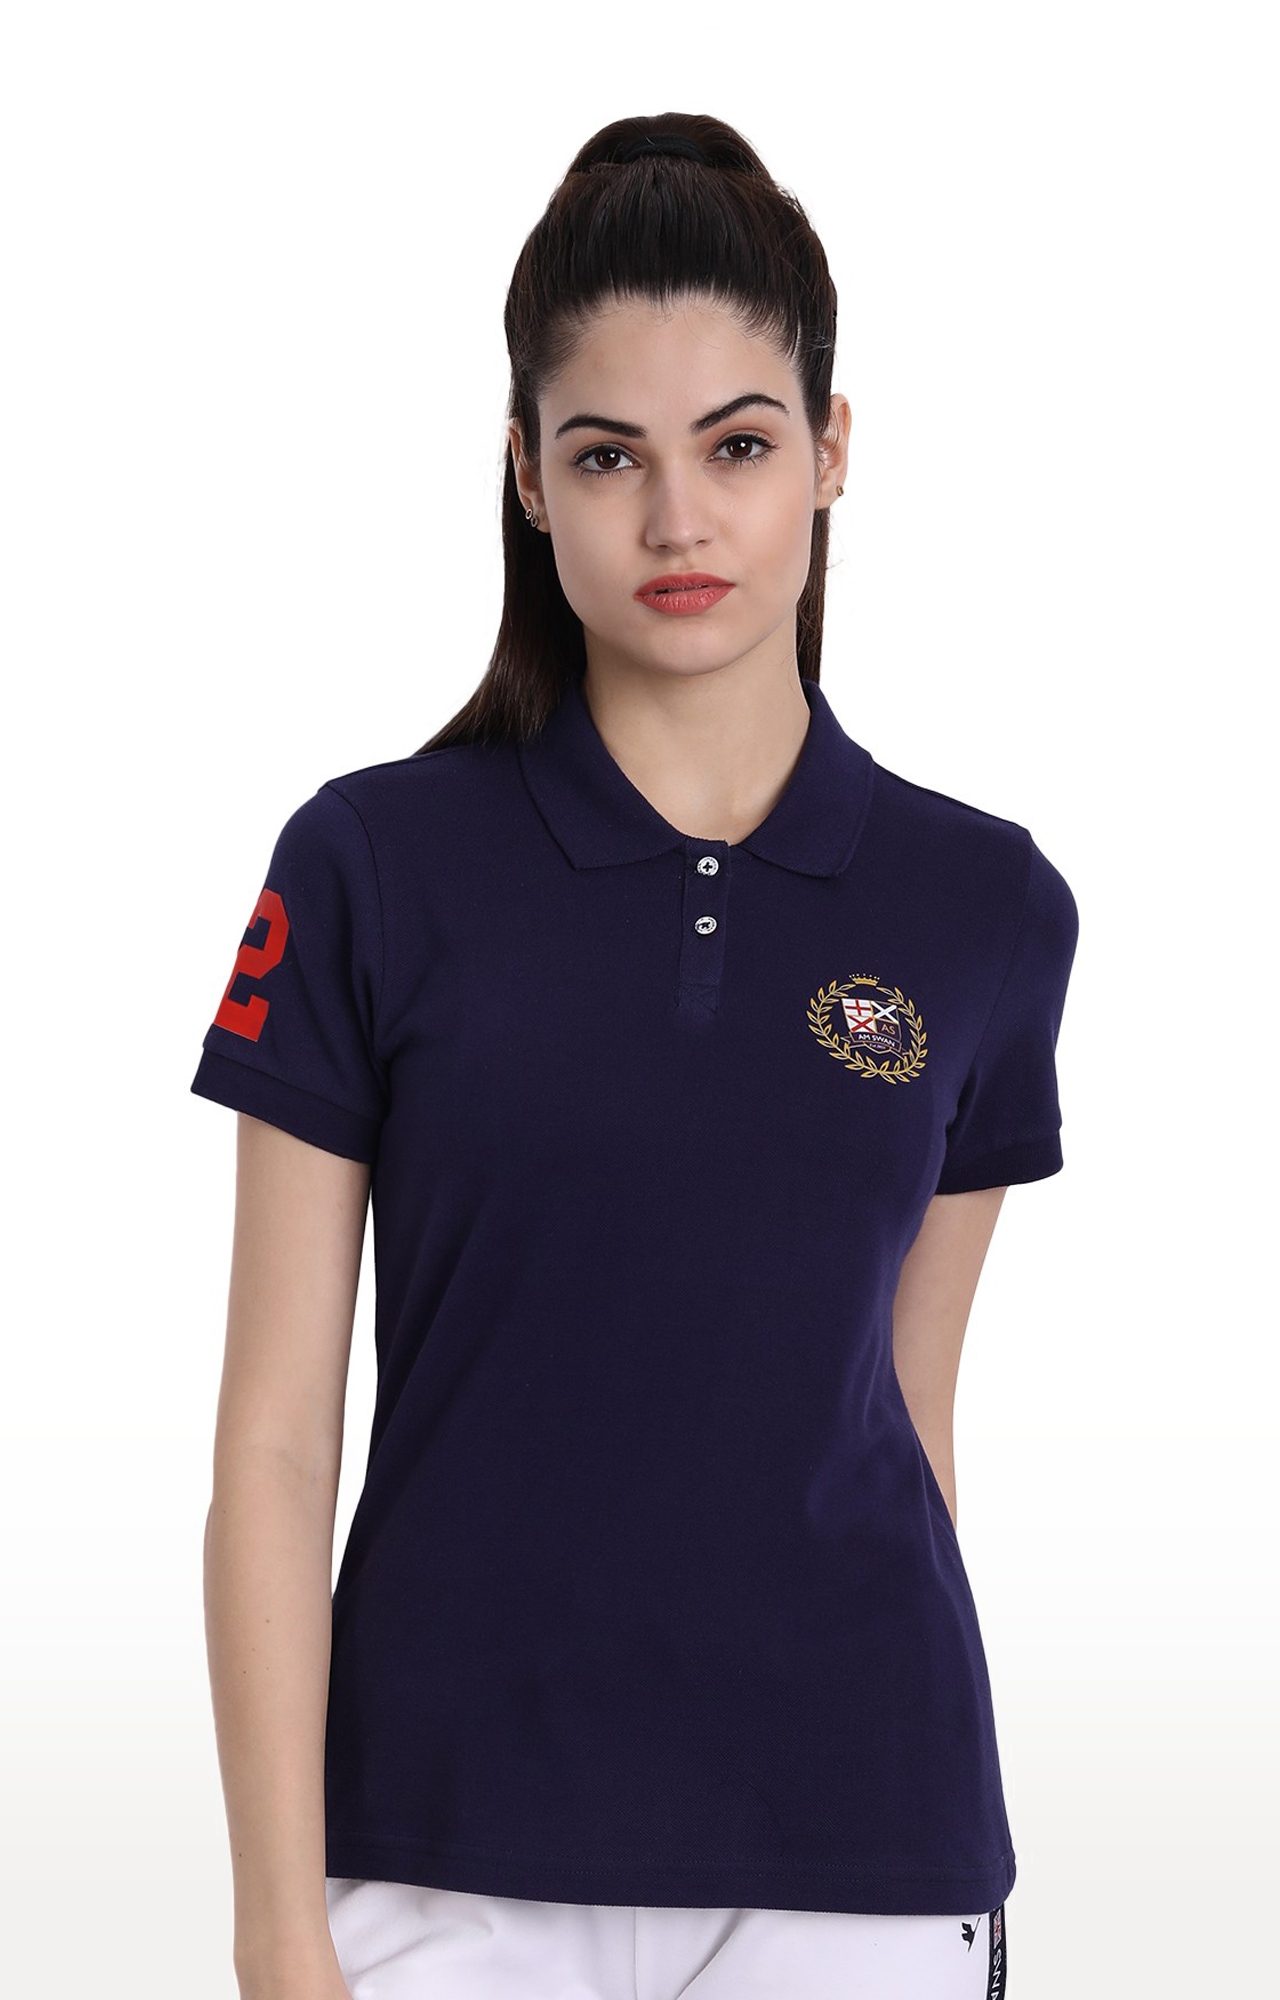 Am Swan | Women's Navy Cotton Solid Polo T-Shirt